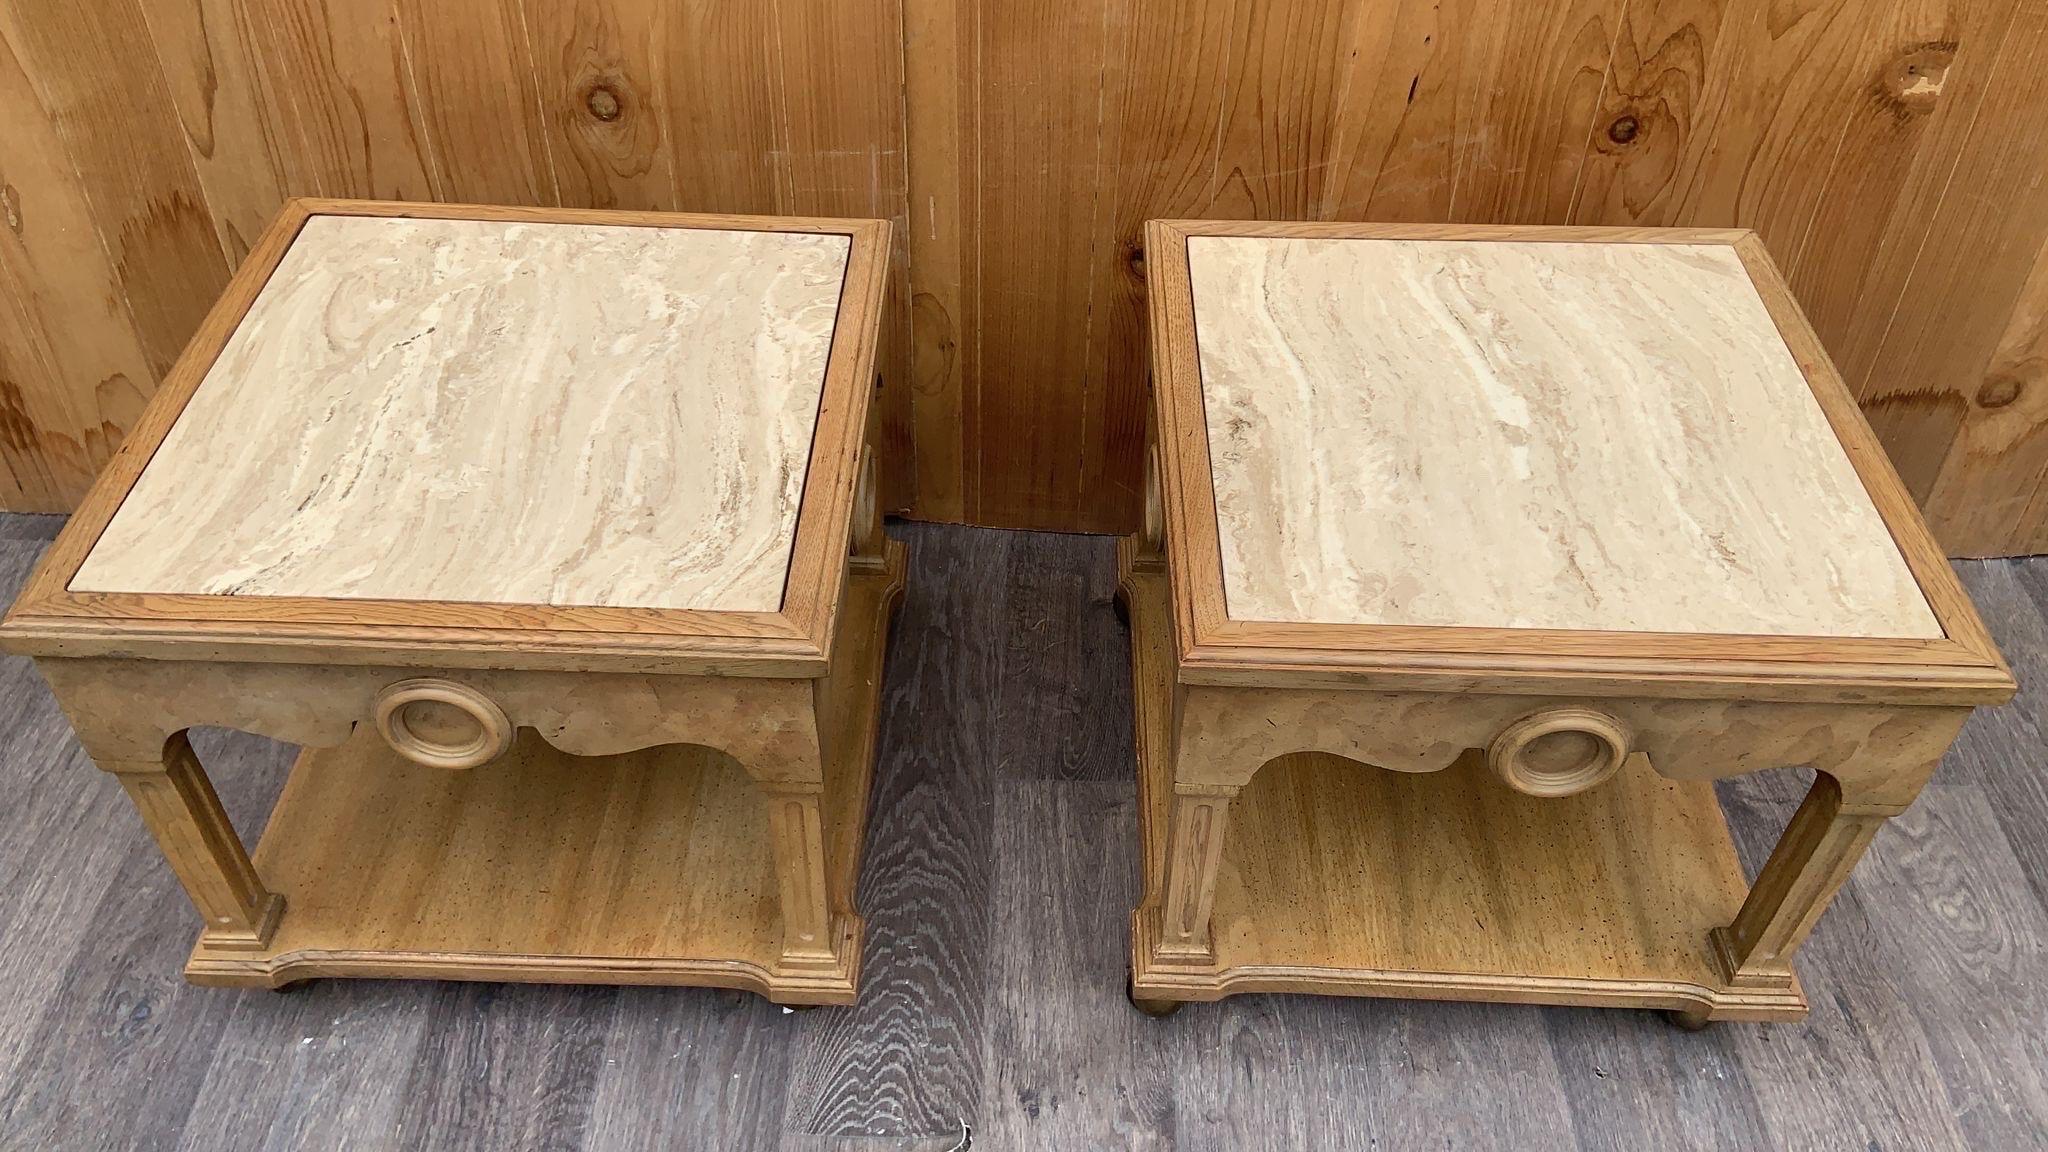 Vintage Italian Neoclassical Style Pickled Wood End Tables w/ Travertine Tops In Good Condition For Sale In Chicago, IL